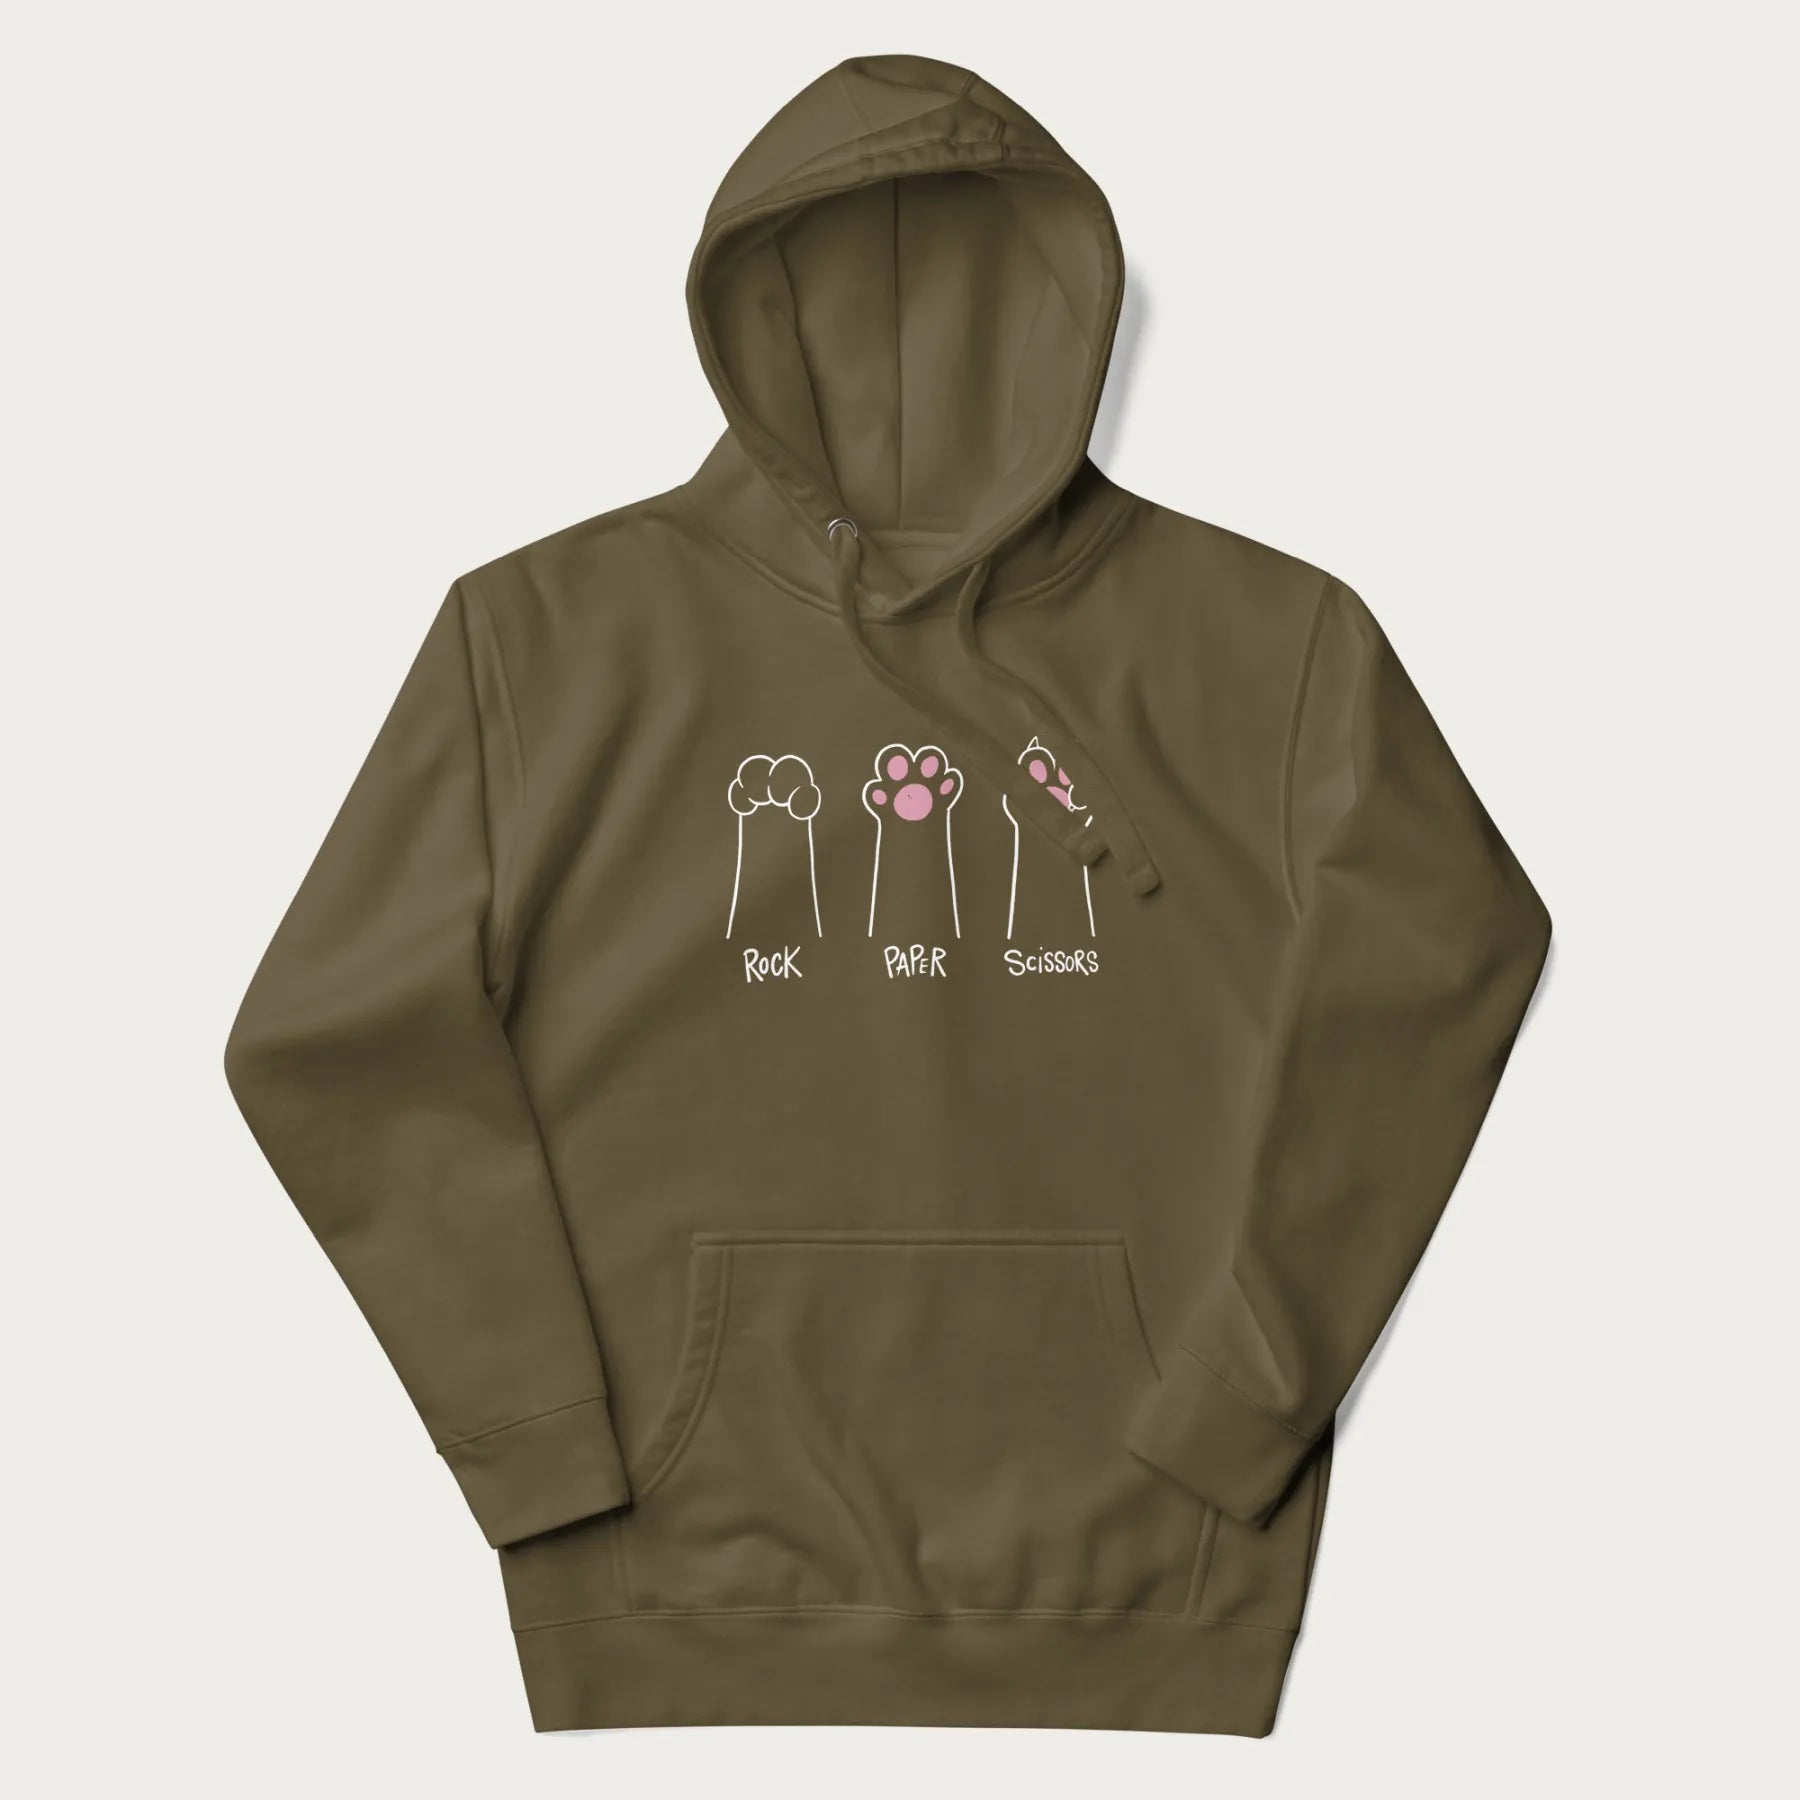 Military green hoodie with graphic of cat paws playing rock-paper-scissors.